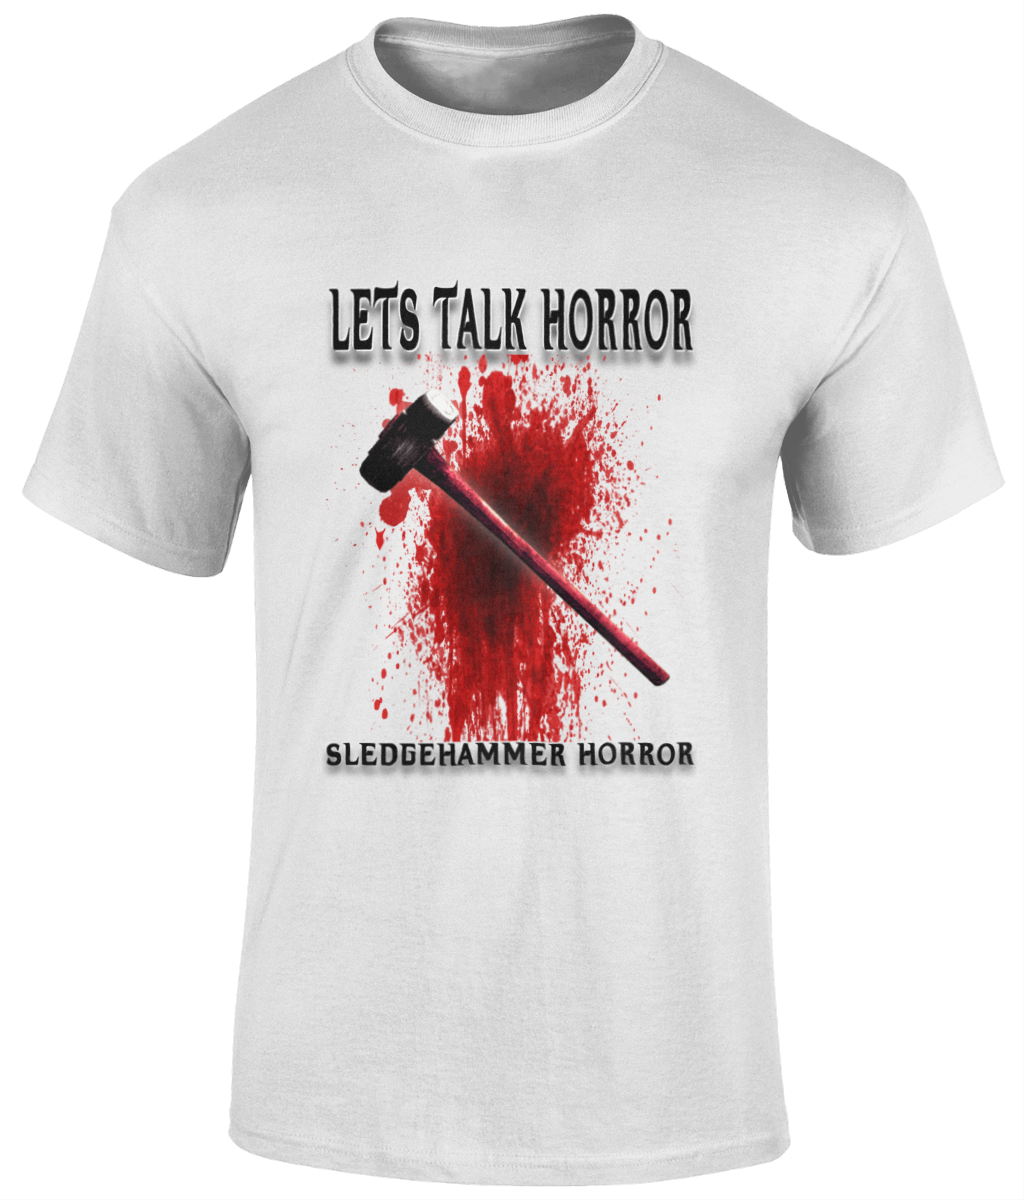 POISON VALLEY CLOTHING "SLEDGEHAMMER HORROR LET'S TALK HORROR" unisex t shirt  Material: 100% cotton  Seamless twin needle collar. Taped neck and shoulders. Tubular body. Twin needle sleeves and hem. Available in black or white Sizes small to 5XL